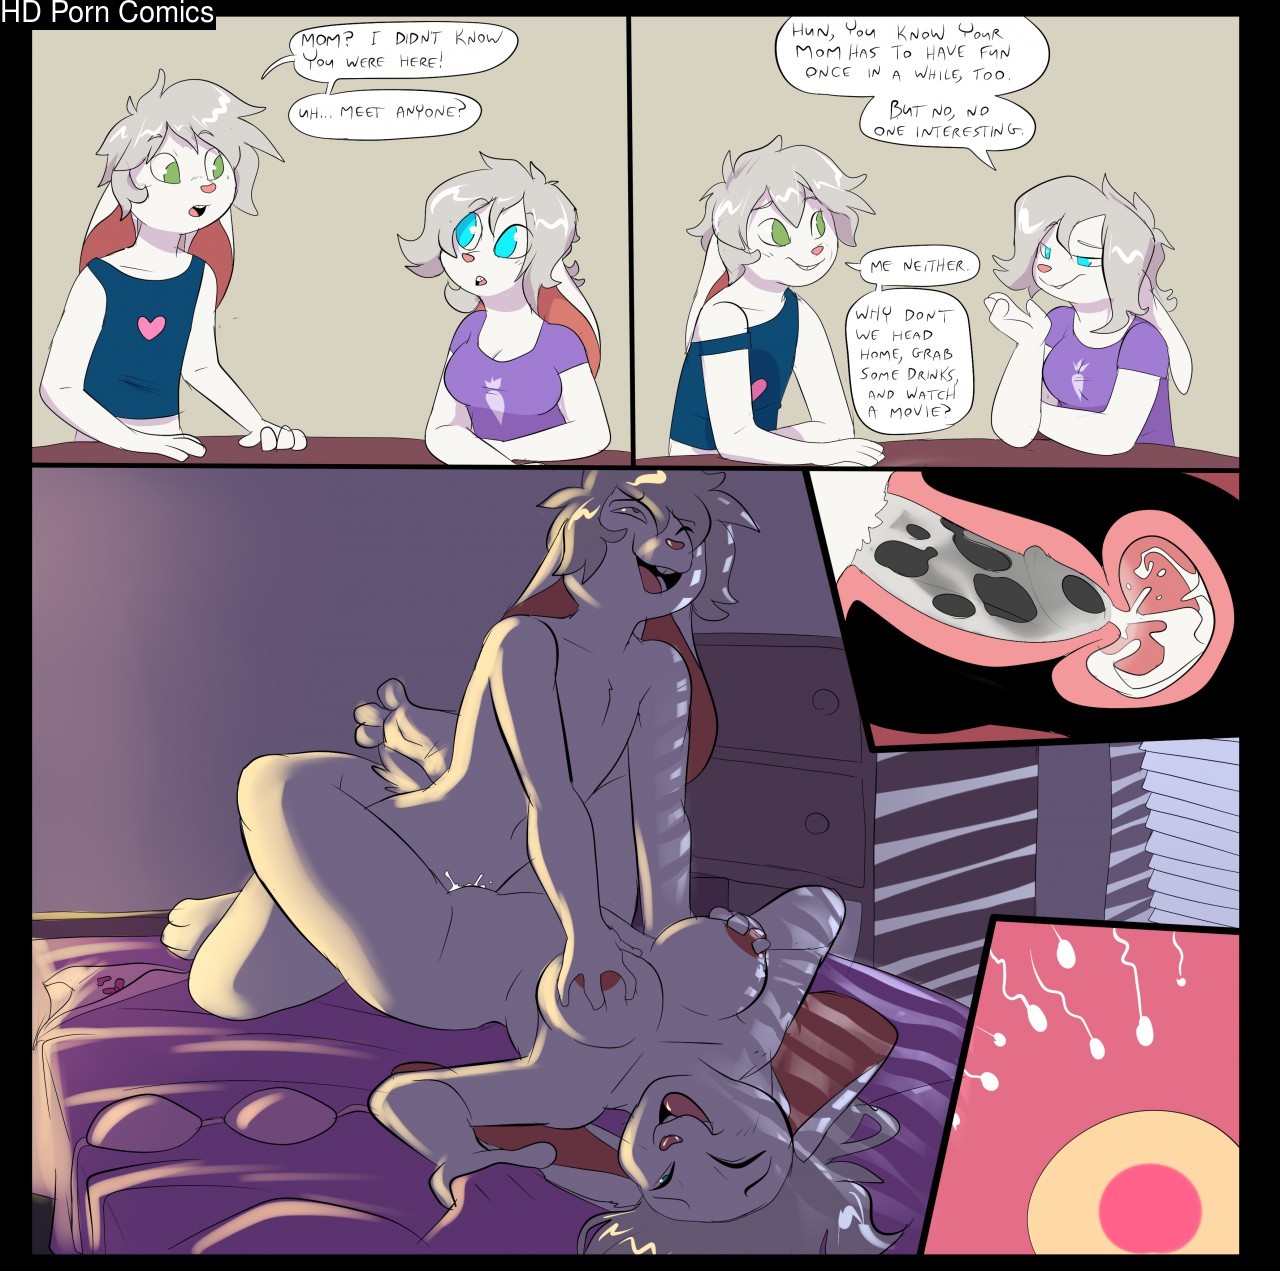 Mother Furry - Porn Comics - Speed Date Gone Wrong - JAB Comix